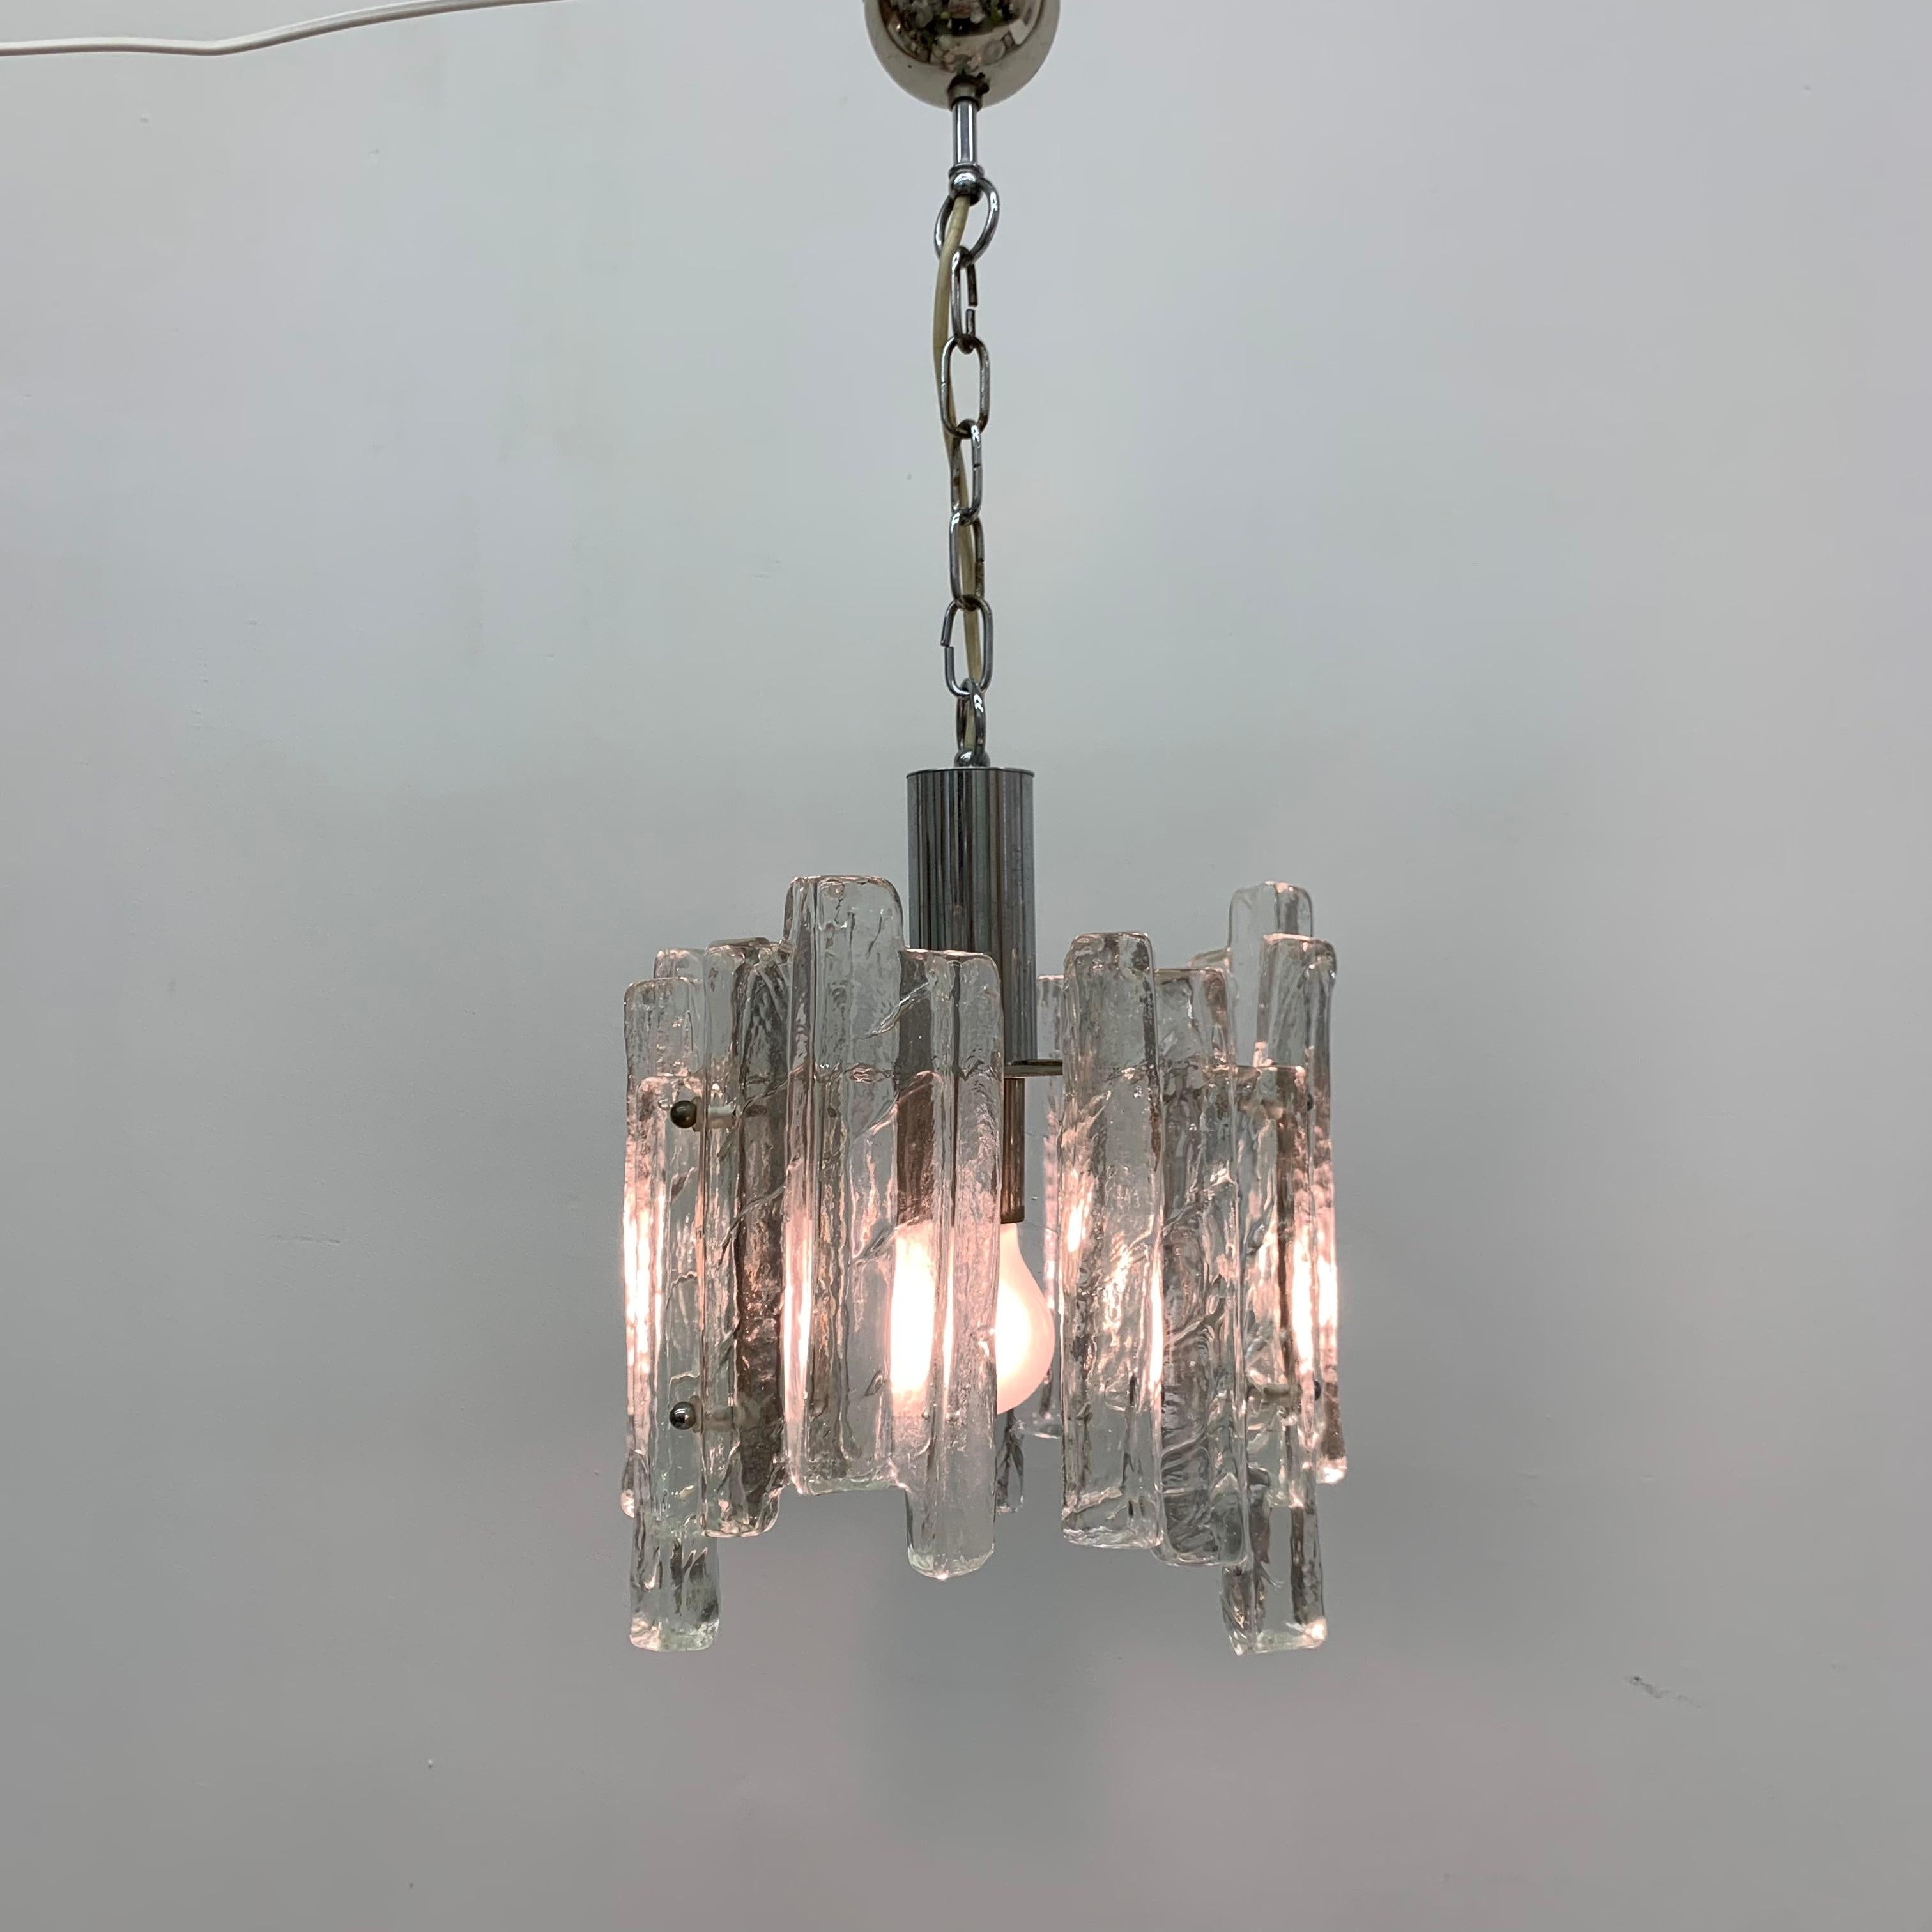 Hanging lamp in Frosted Ice Glass by J. T. Kalmar for Kalmar Franken KG, 1960s For Sale 11